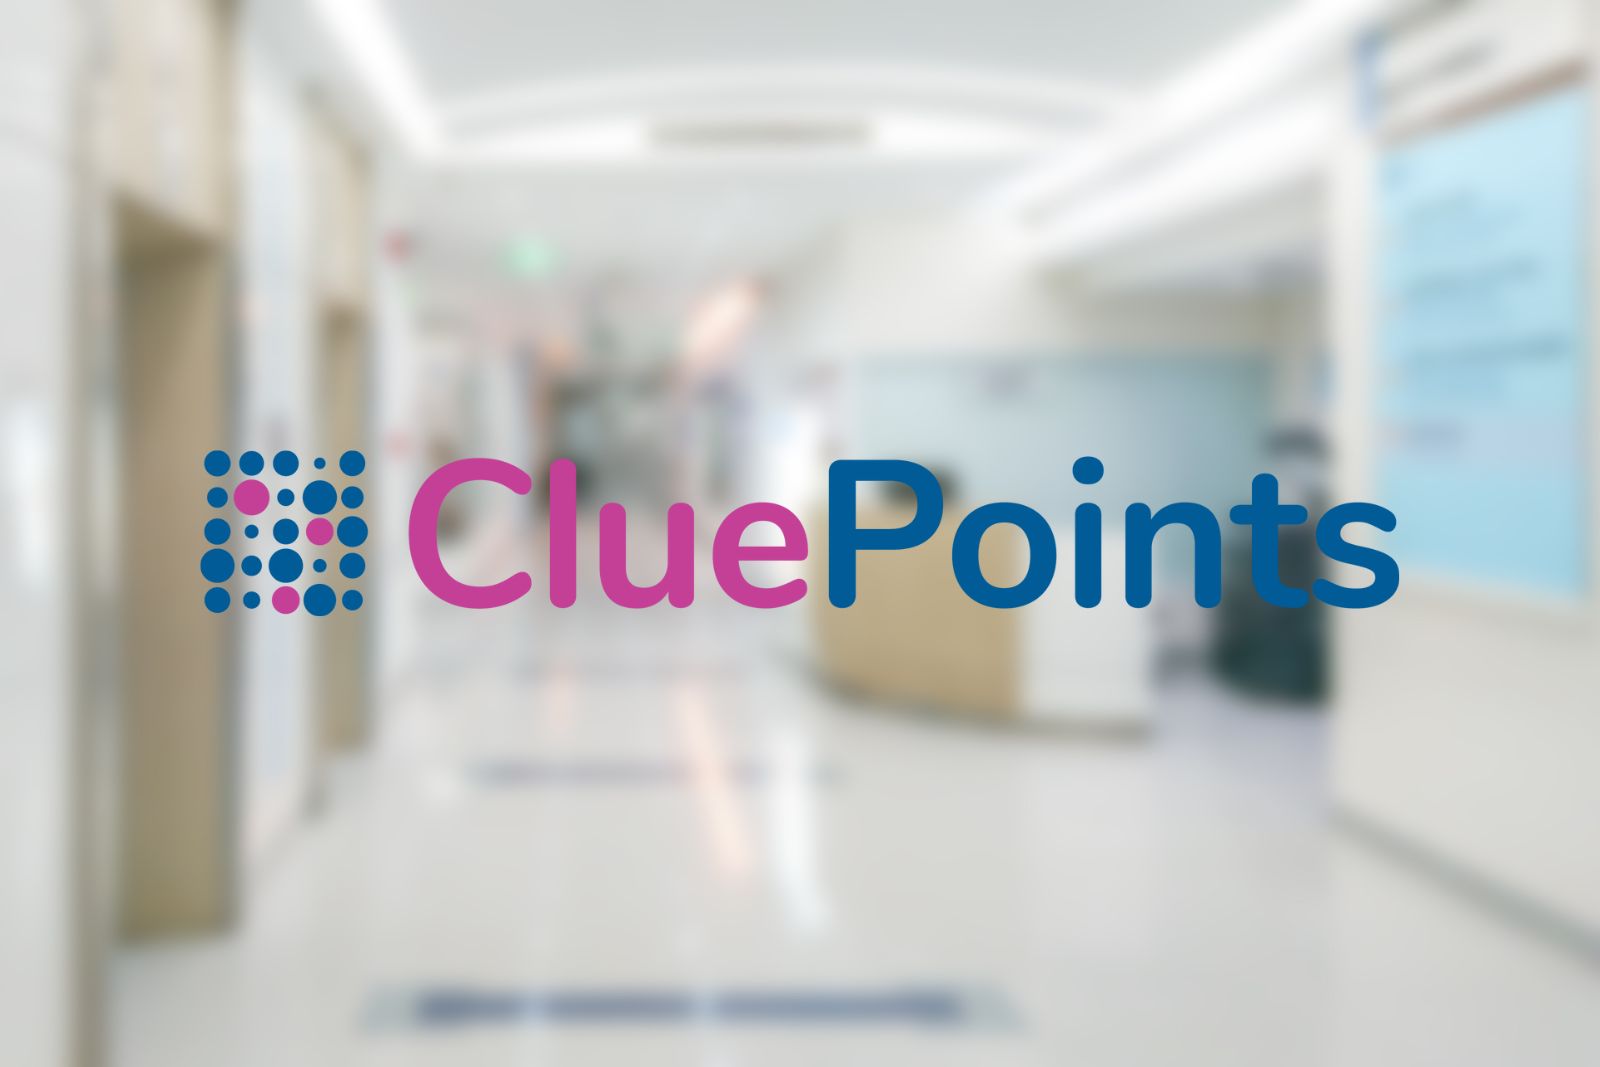 Cluepoints